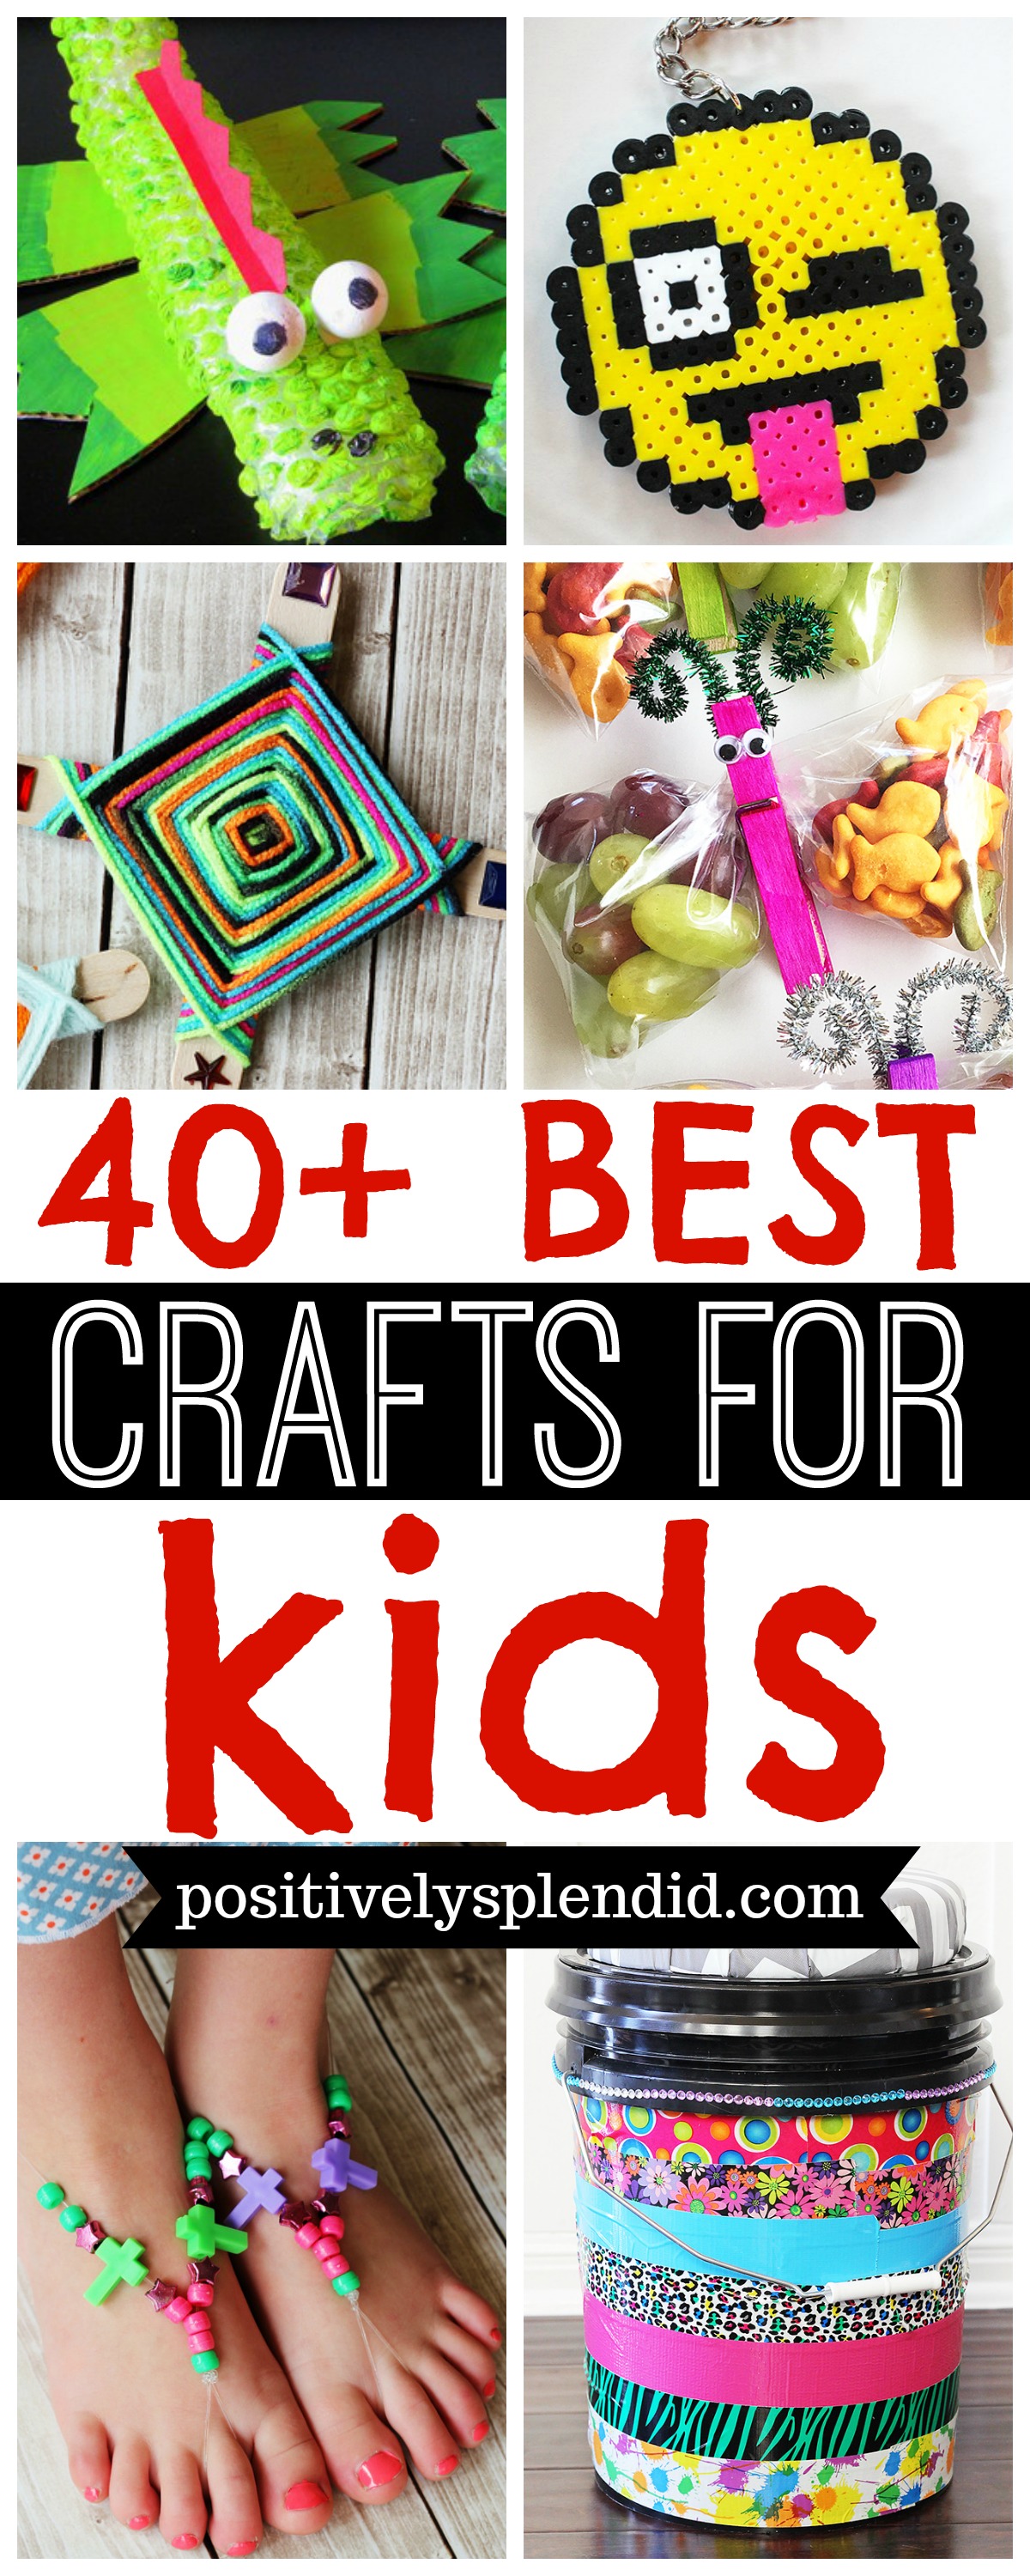 The Best Ideas For Kids The Best Kids Crafts & Activities 771